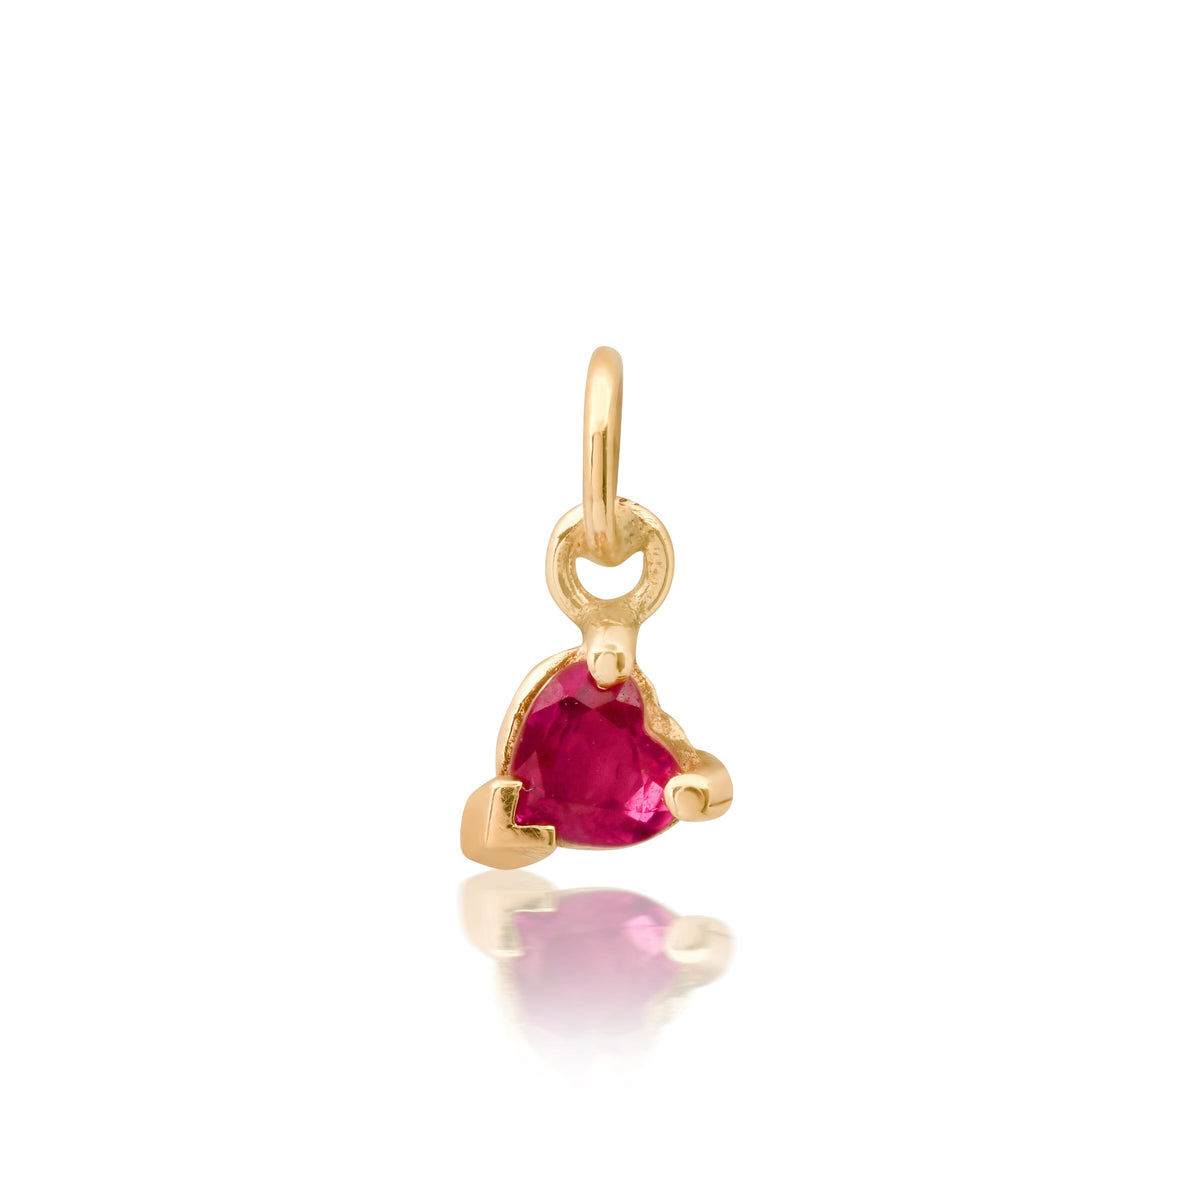 Open Hearted Ruby Heart Charm -14k yellow gold | Fine Collection charm Amanda K Lockrow